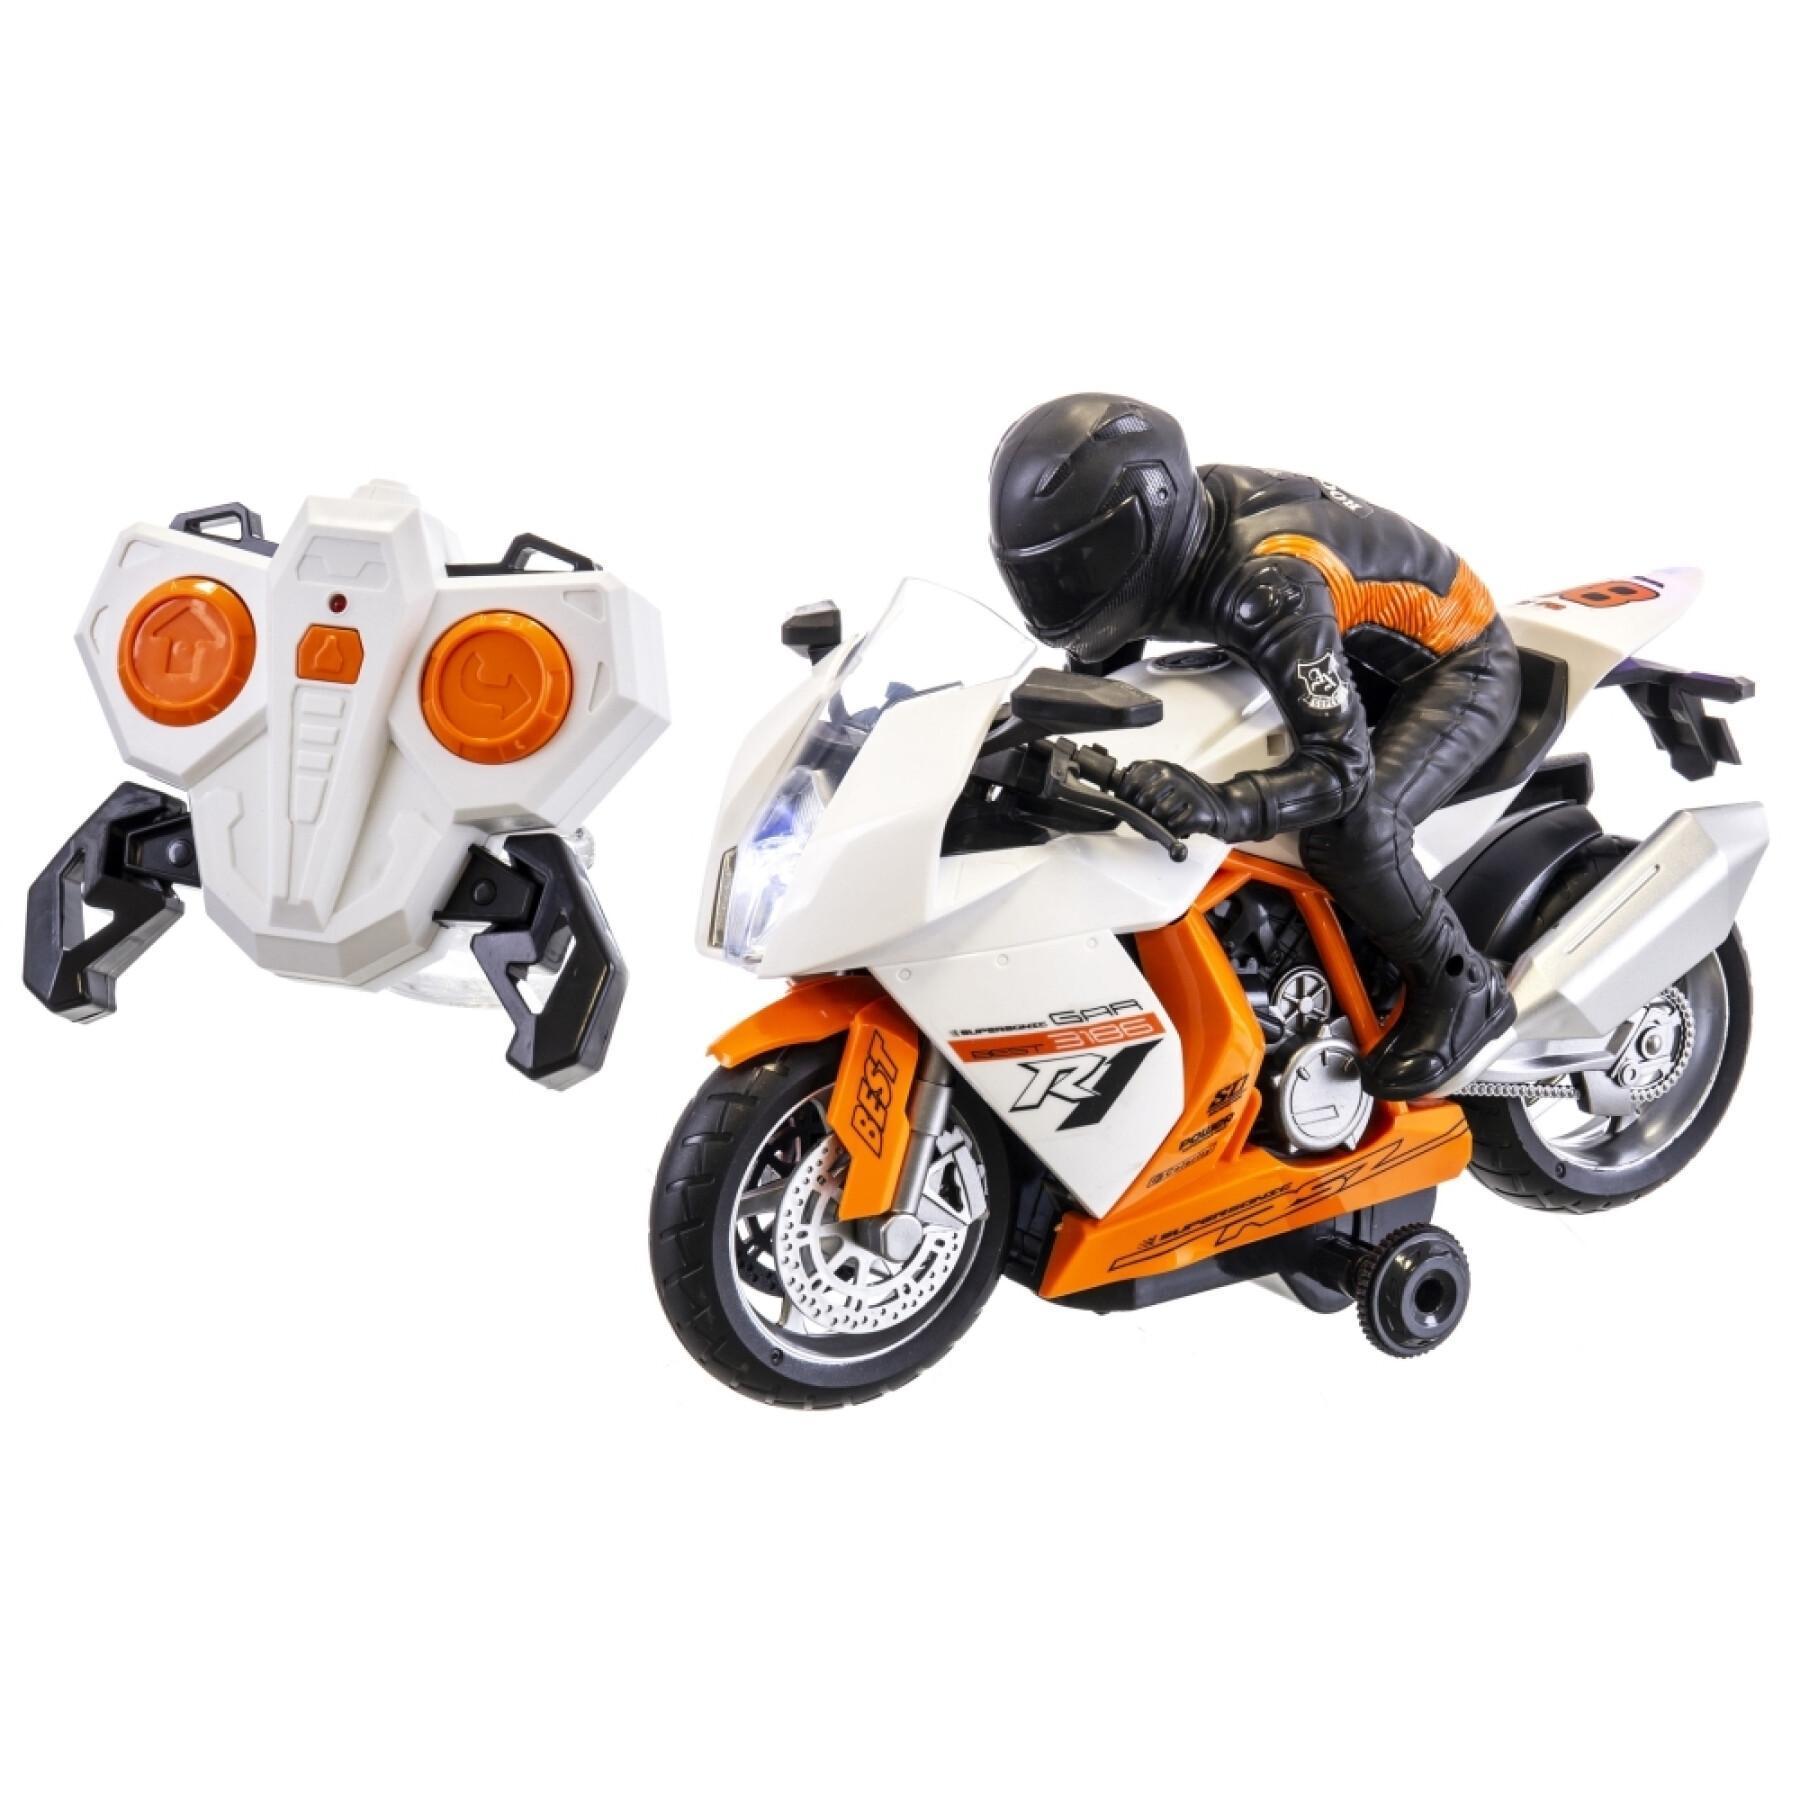 Radio-controlled motorcycle with figure functions Fantastiko